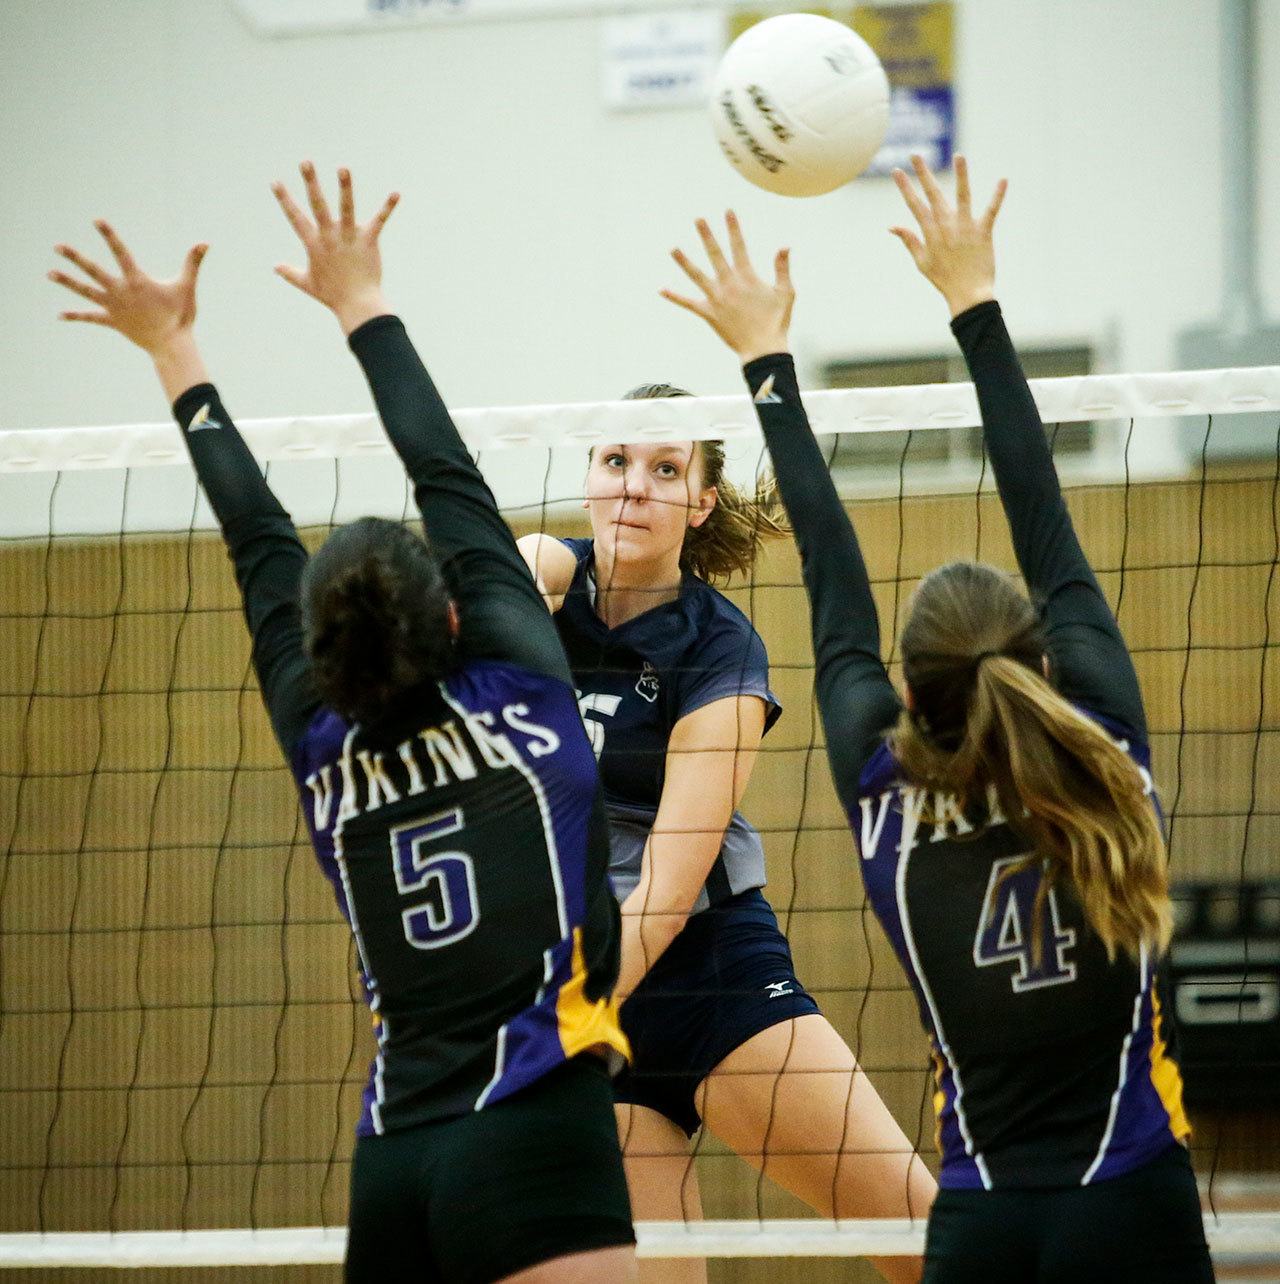 Glacier Peak’s Lauren Sanders (center) spikes the ball through the outstretched arms of Lake Stevens’ Gabby Gunterman (left) and Grace Schroedl (right) during a game at Lake Stevens High School on Oct. 18. Sanders and Gunterman were both named to The Herald’s 2016 All-Area Volleyball Team. (Ian Terry / The Herald)